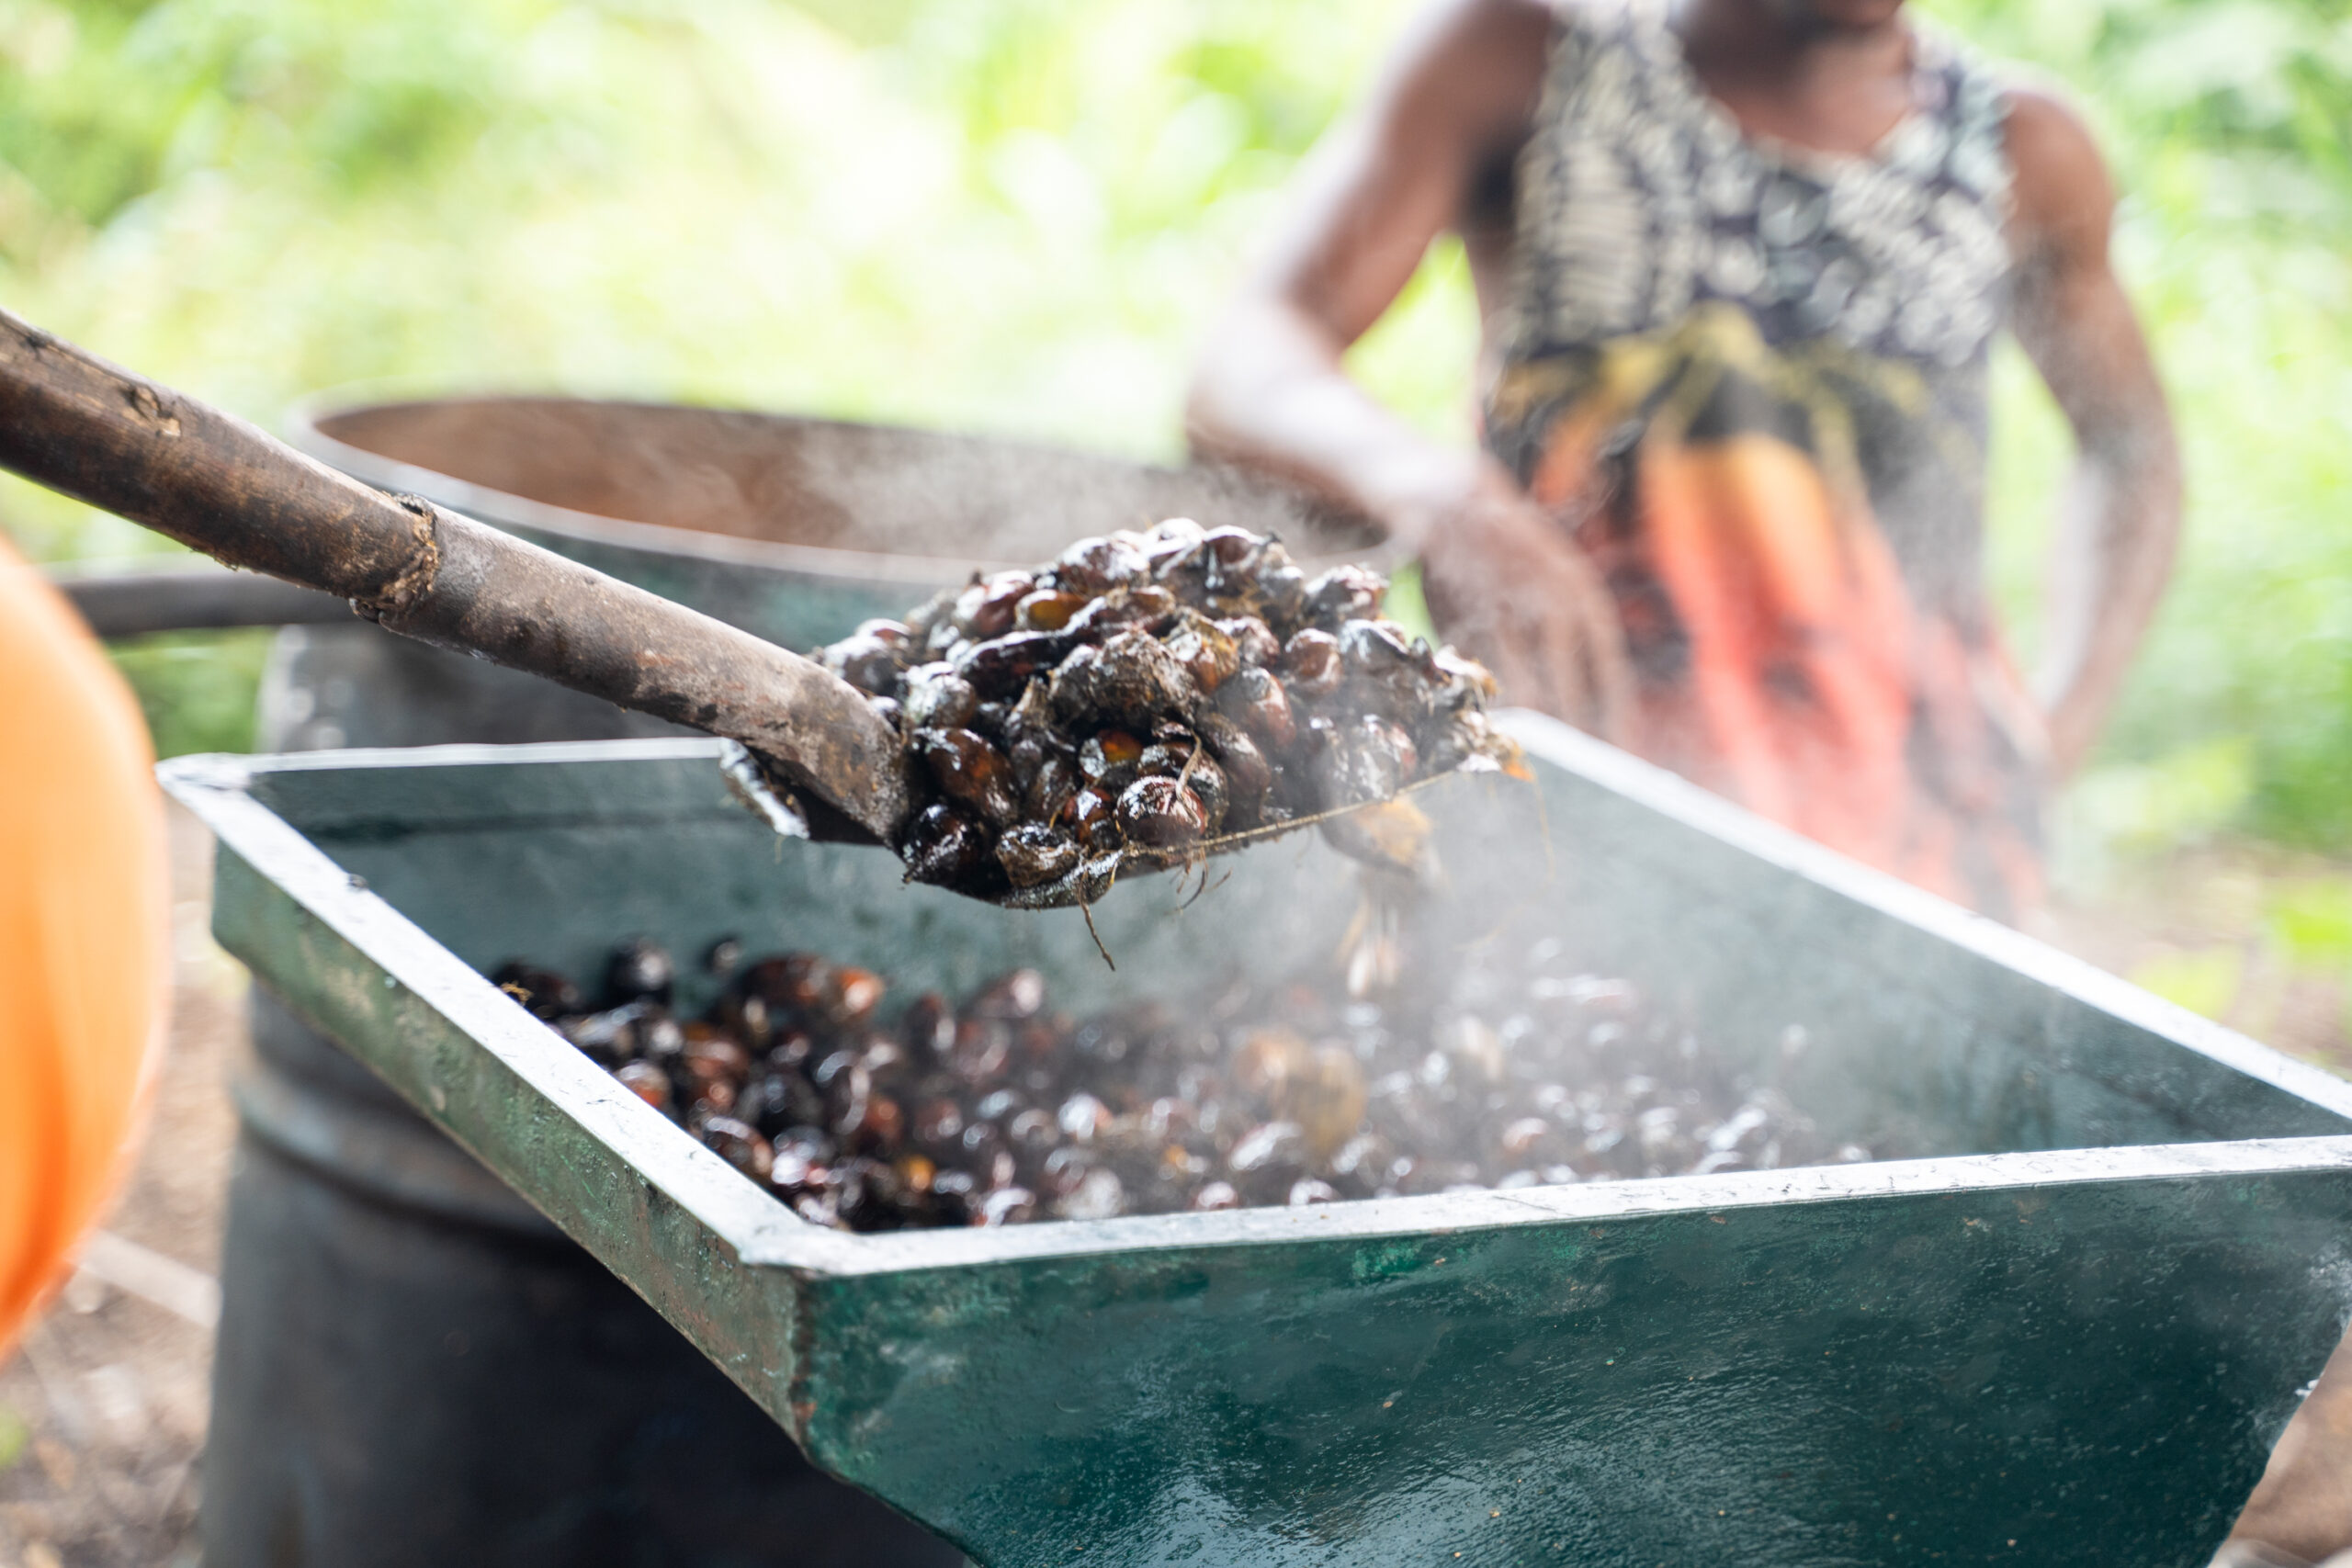 West Africa Trade & Investment Hub Partners with 8 Degrees North to Support an Alliance Giving Smallholders Access to the Growing Organic Palm Market